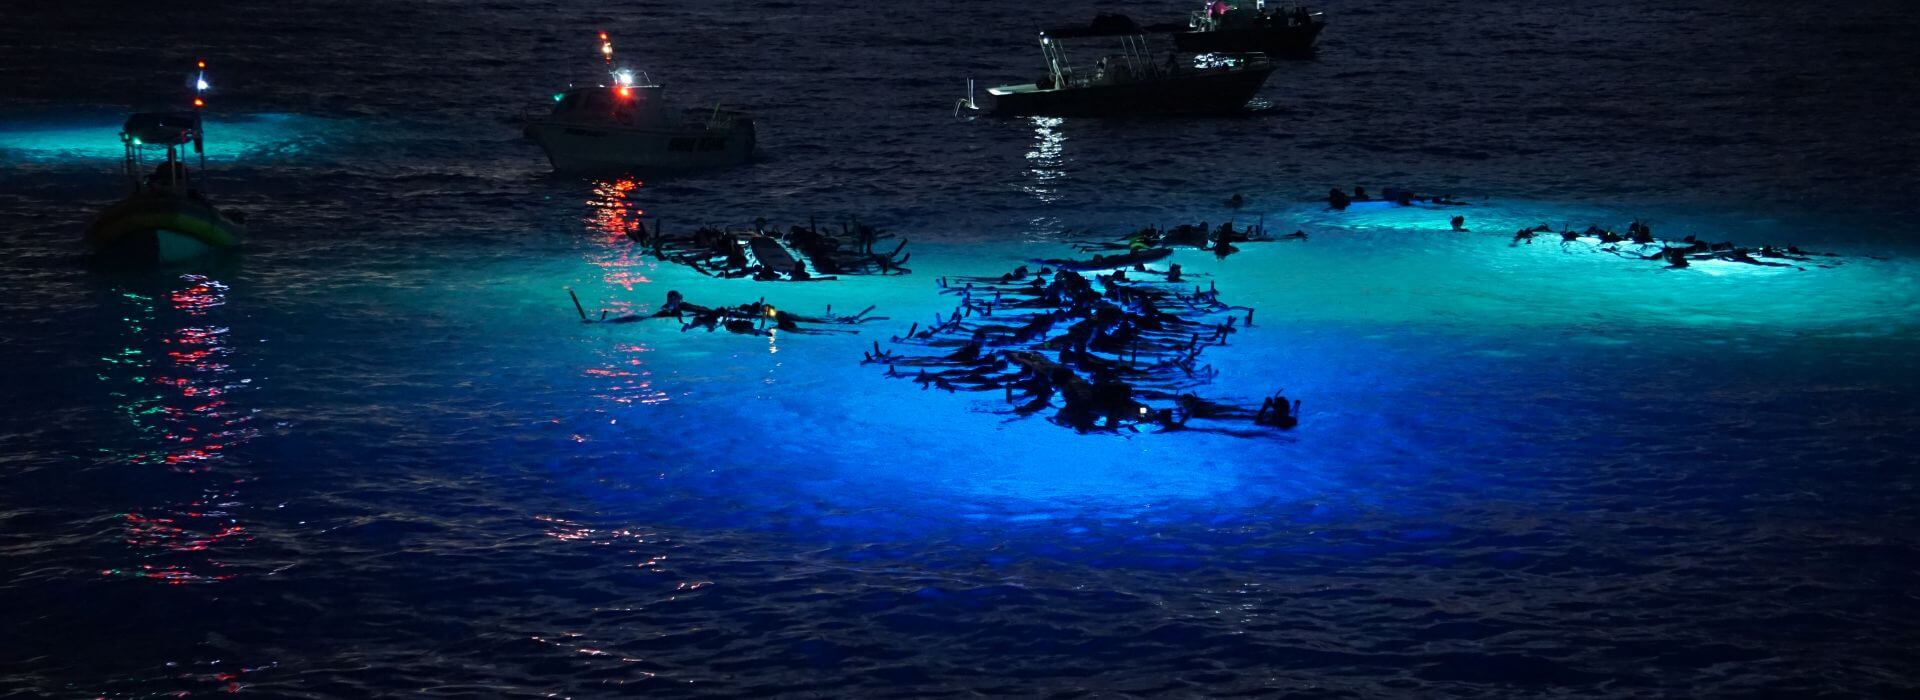 people snorkeling at night looking at the bright bioluminescence under the ocean